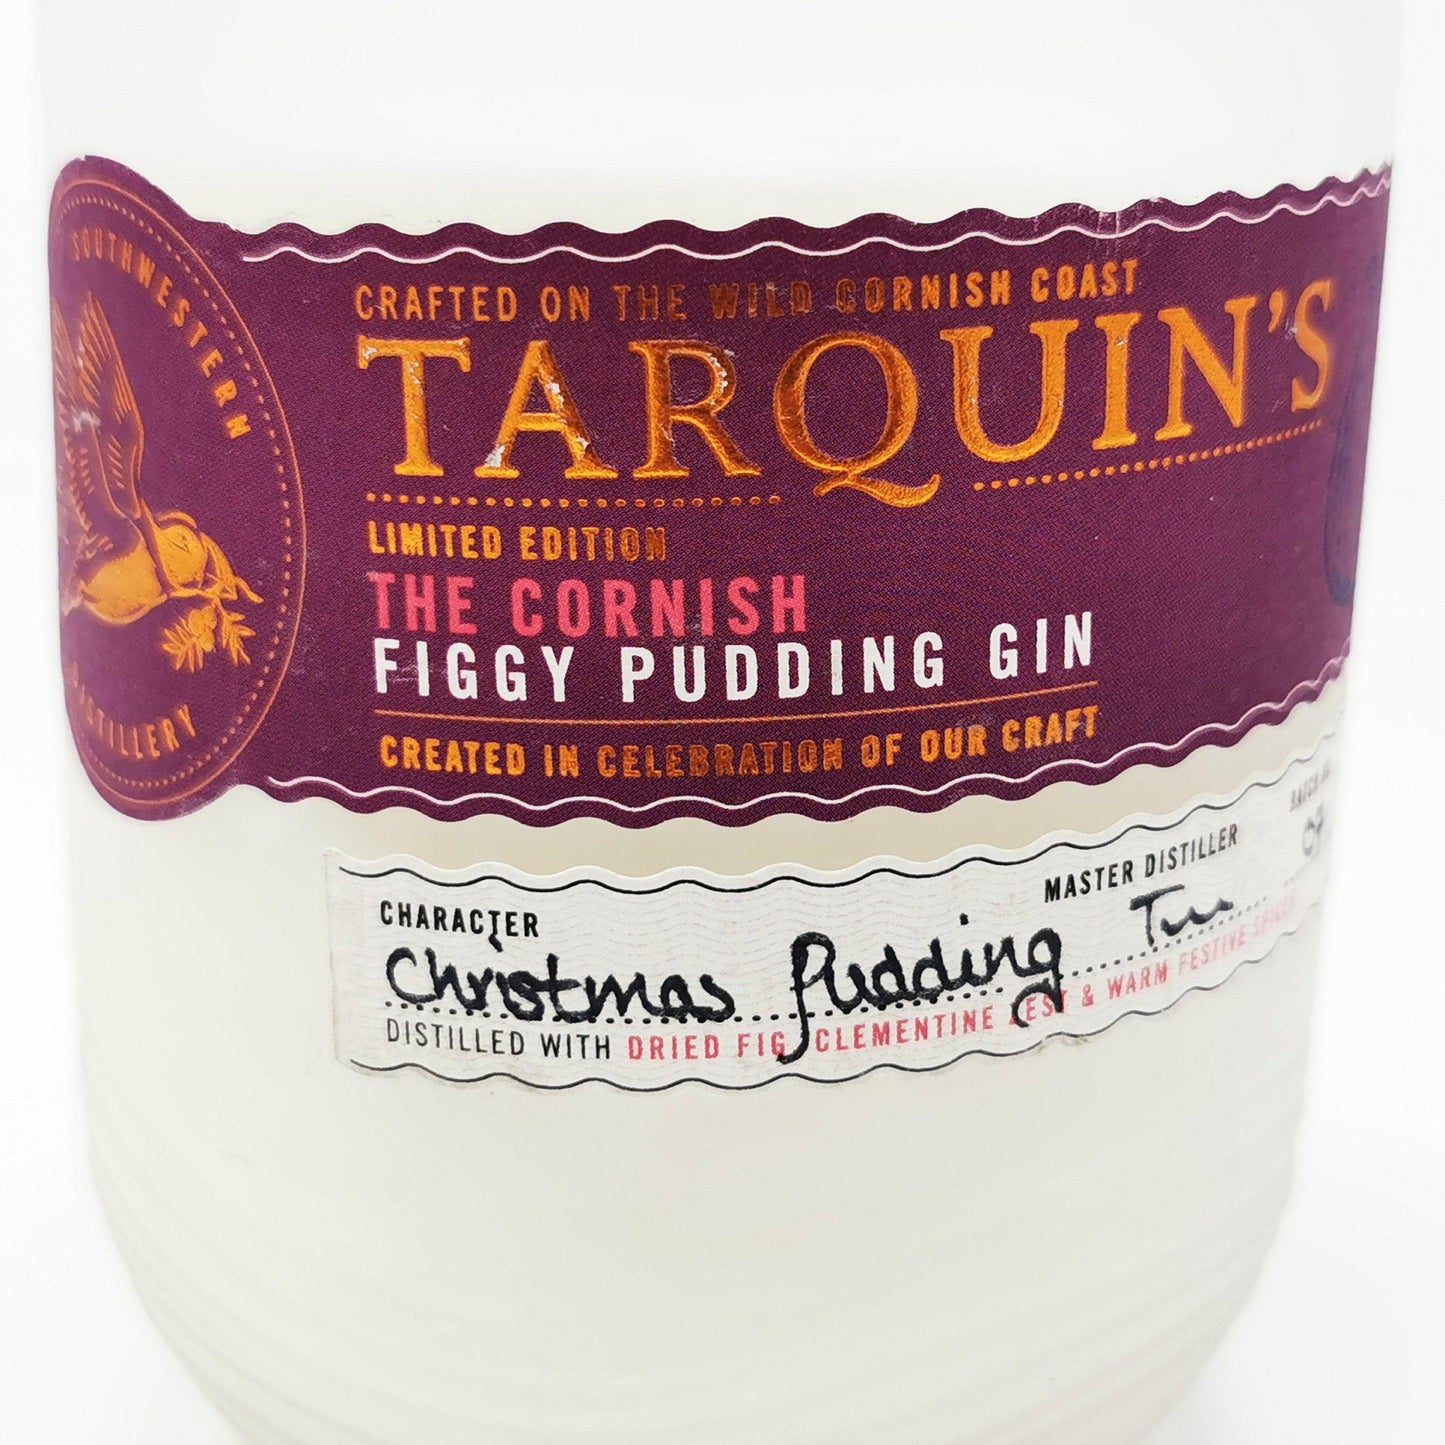 Tarquins Figgy Pudding Gin Bottle Candle-Gin Bottle Candles-Adhock Homeware